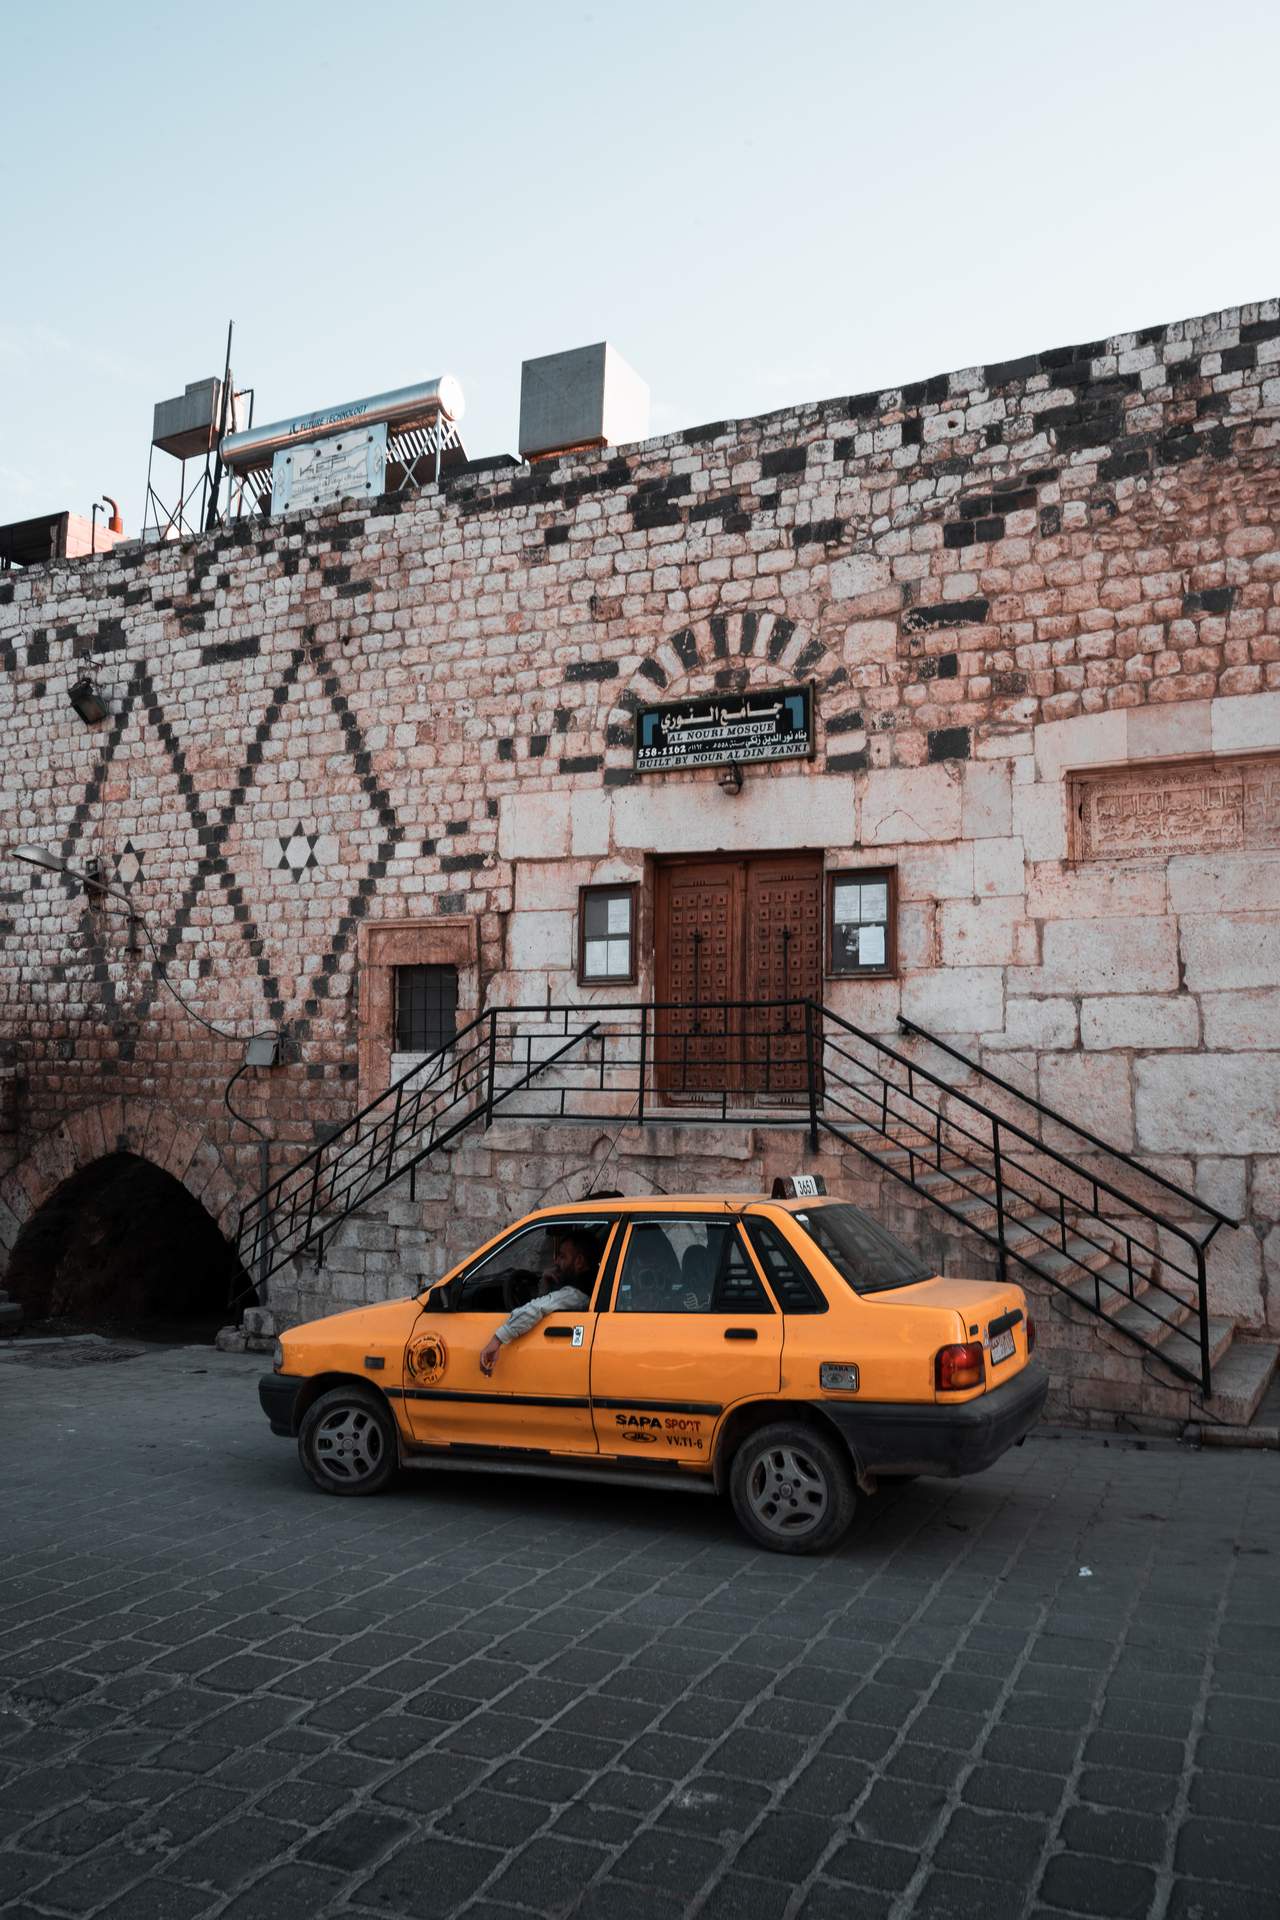 Taxi parked infront of a mosque in Aleppo, Syria. Staying safe when travelling